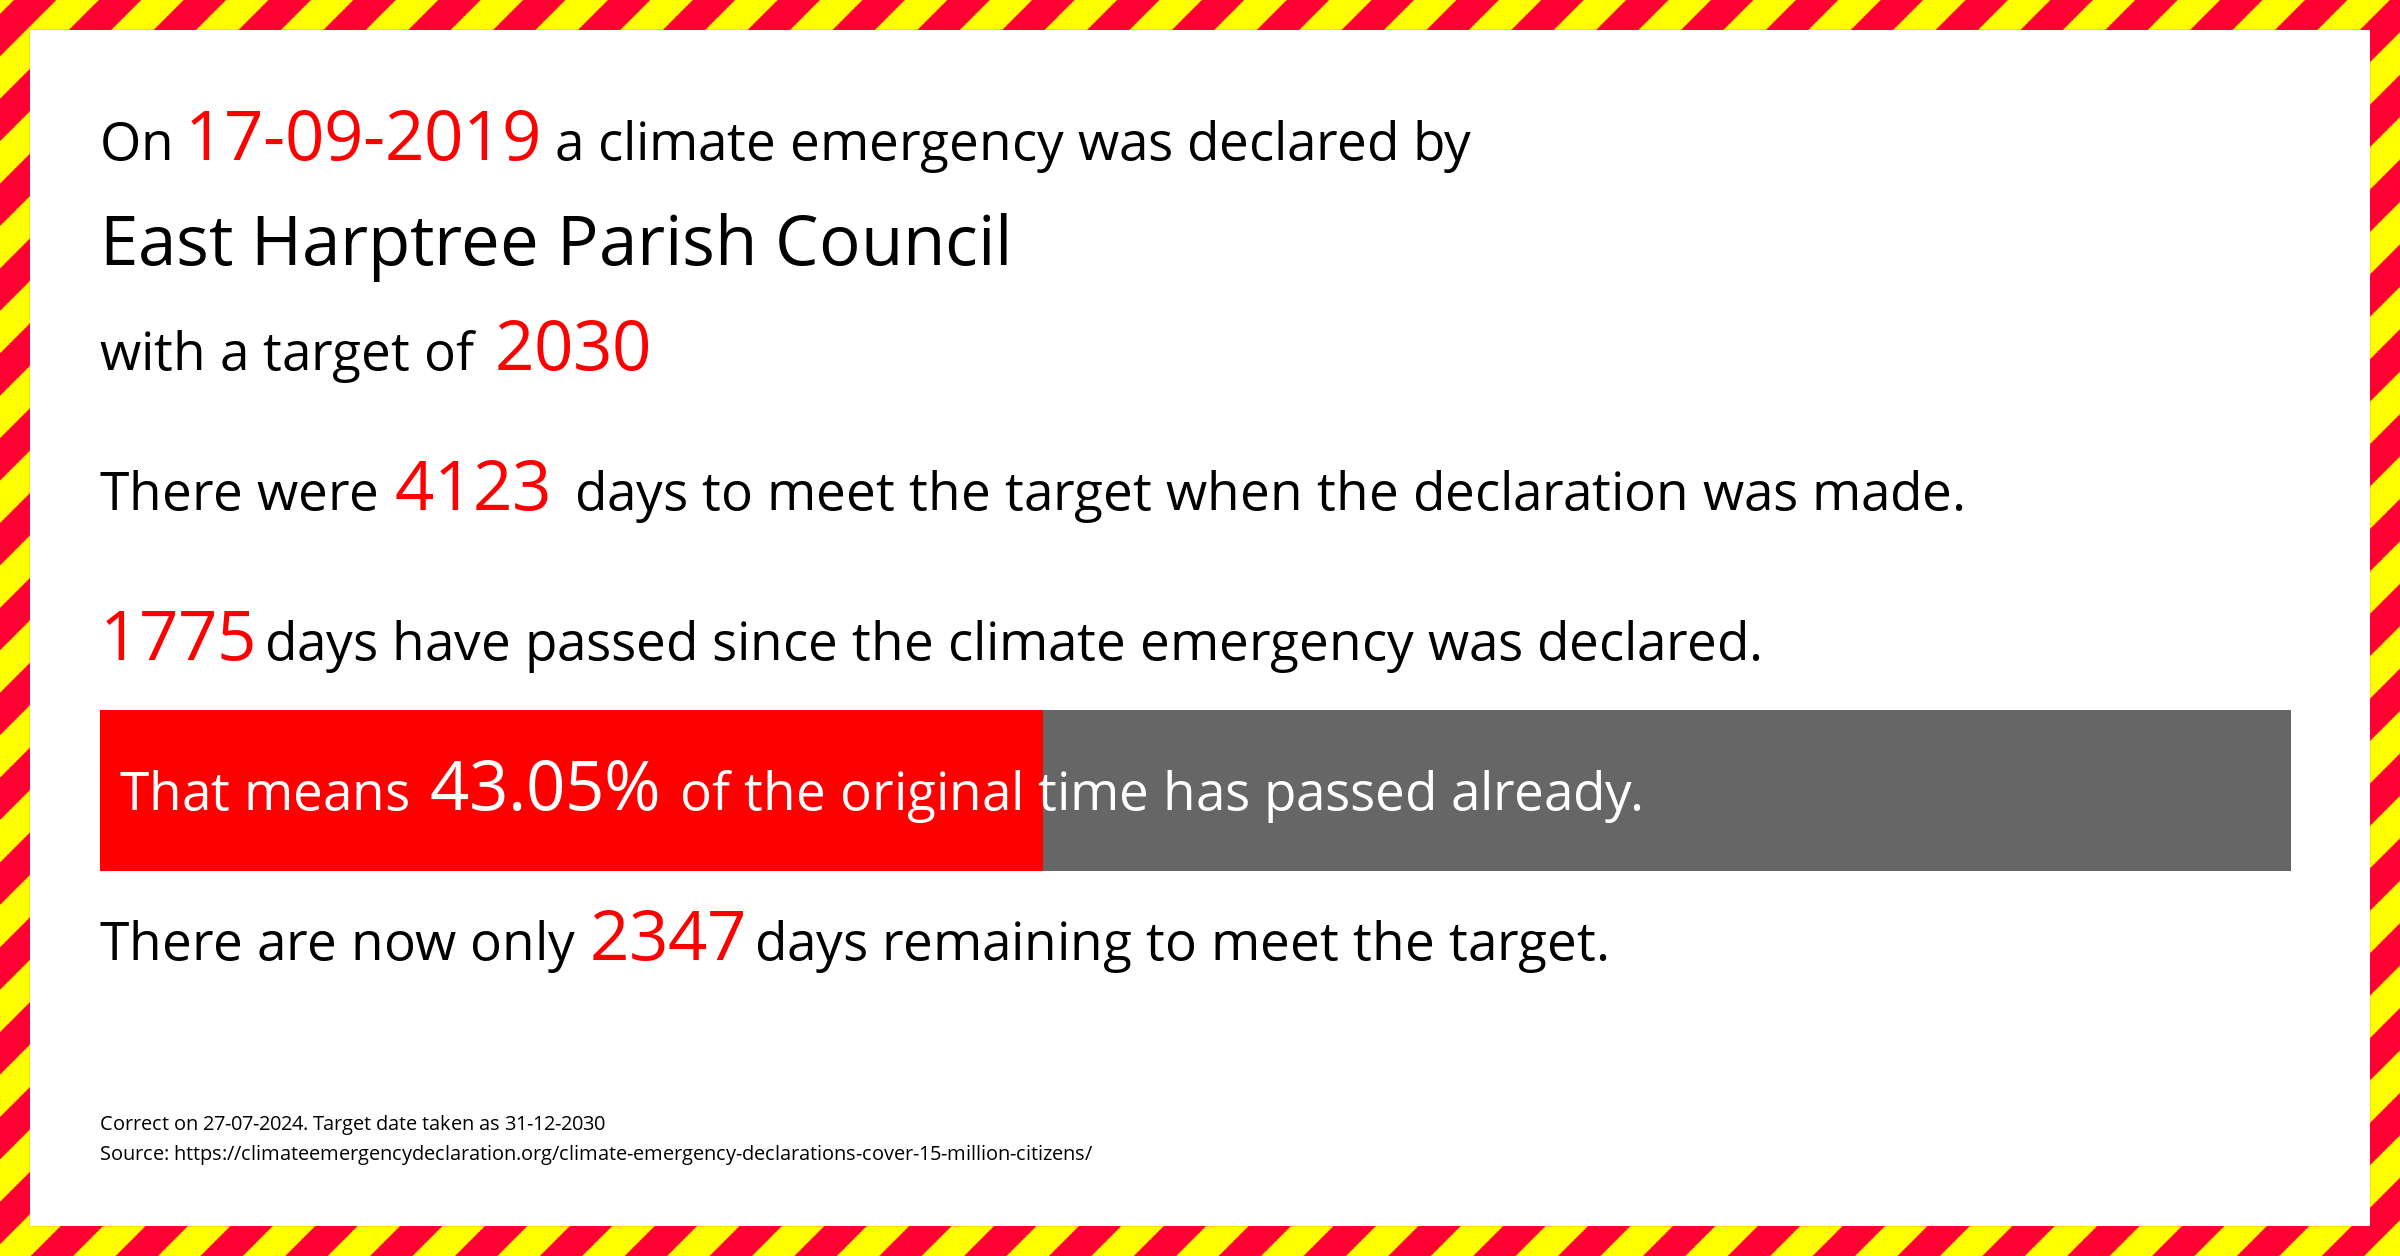 East Harptree Parish Council declared a Climate emergency on Tuesday 17th September 2019, with a target of 2030.